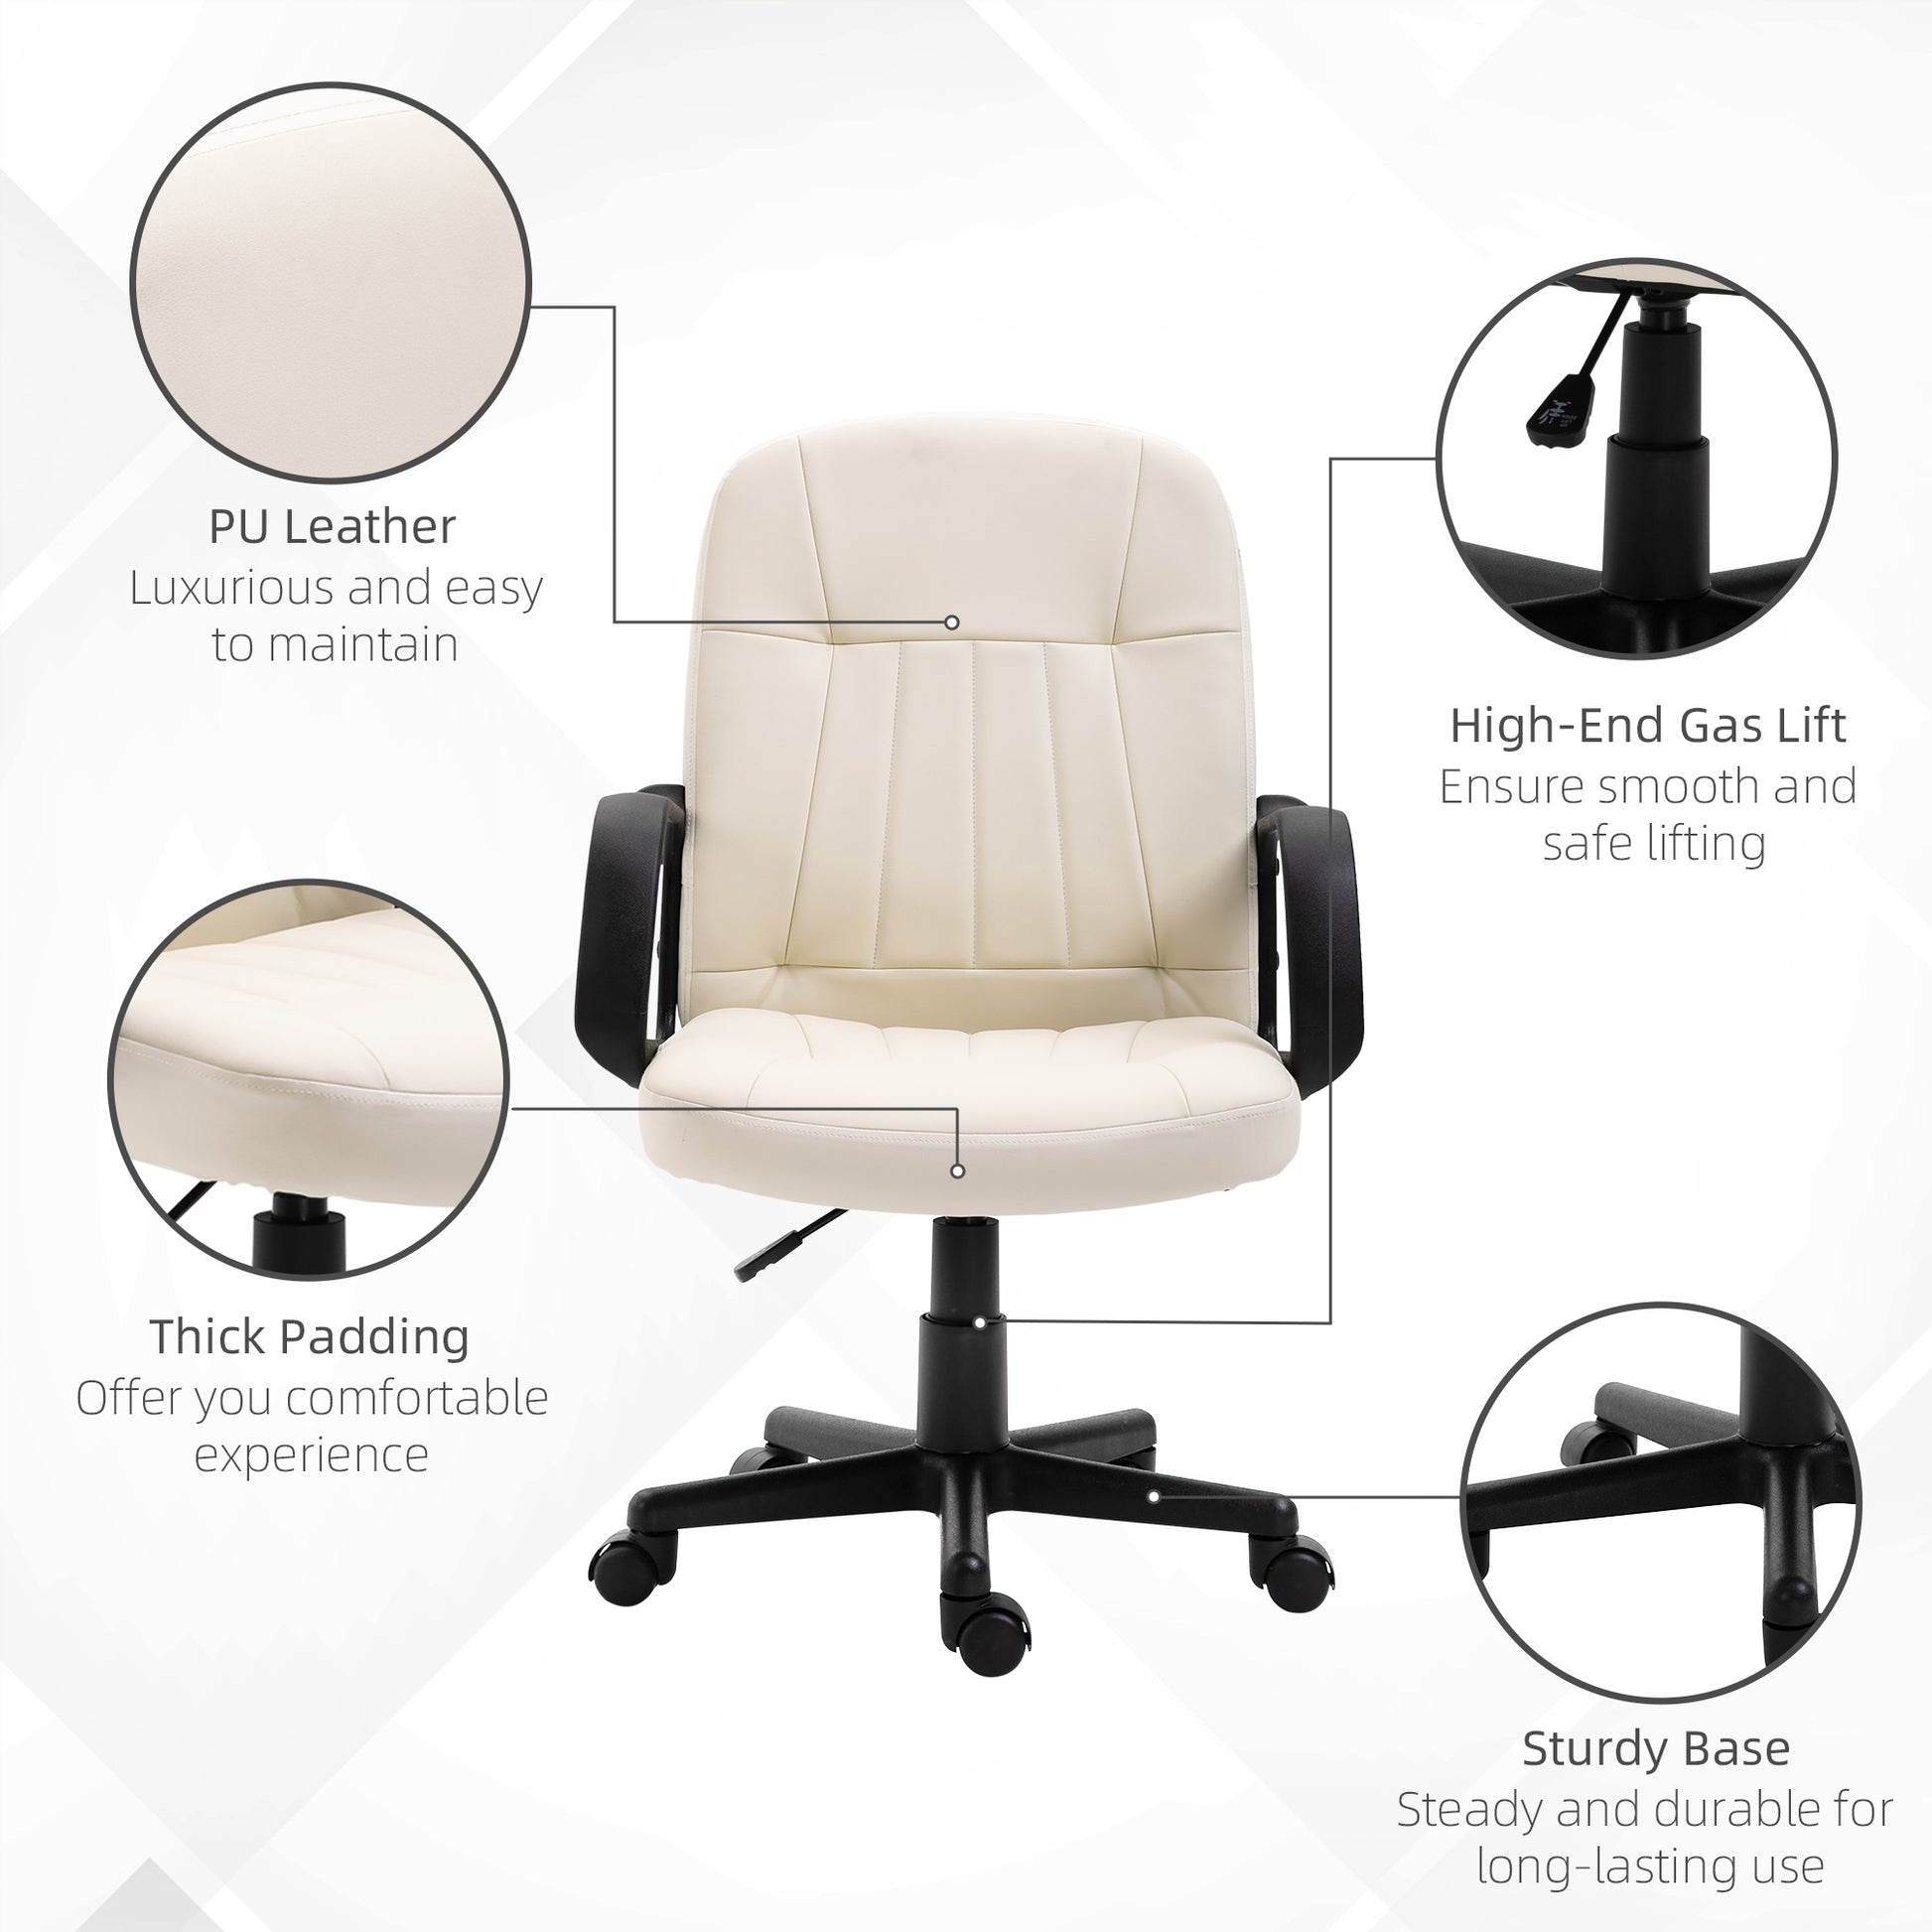 Swivel Executive Office Chair Home, Office Mid Back PU Leather Computer Desk Chair for Adults, Wheels, Cream, HOMCOM, 6